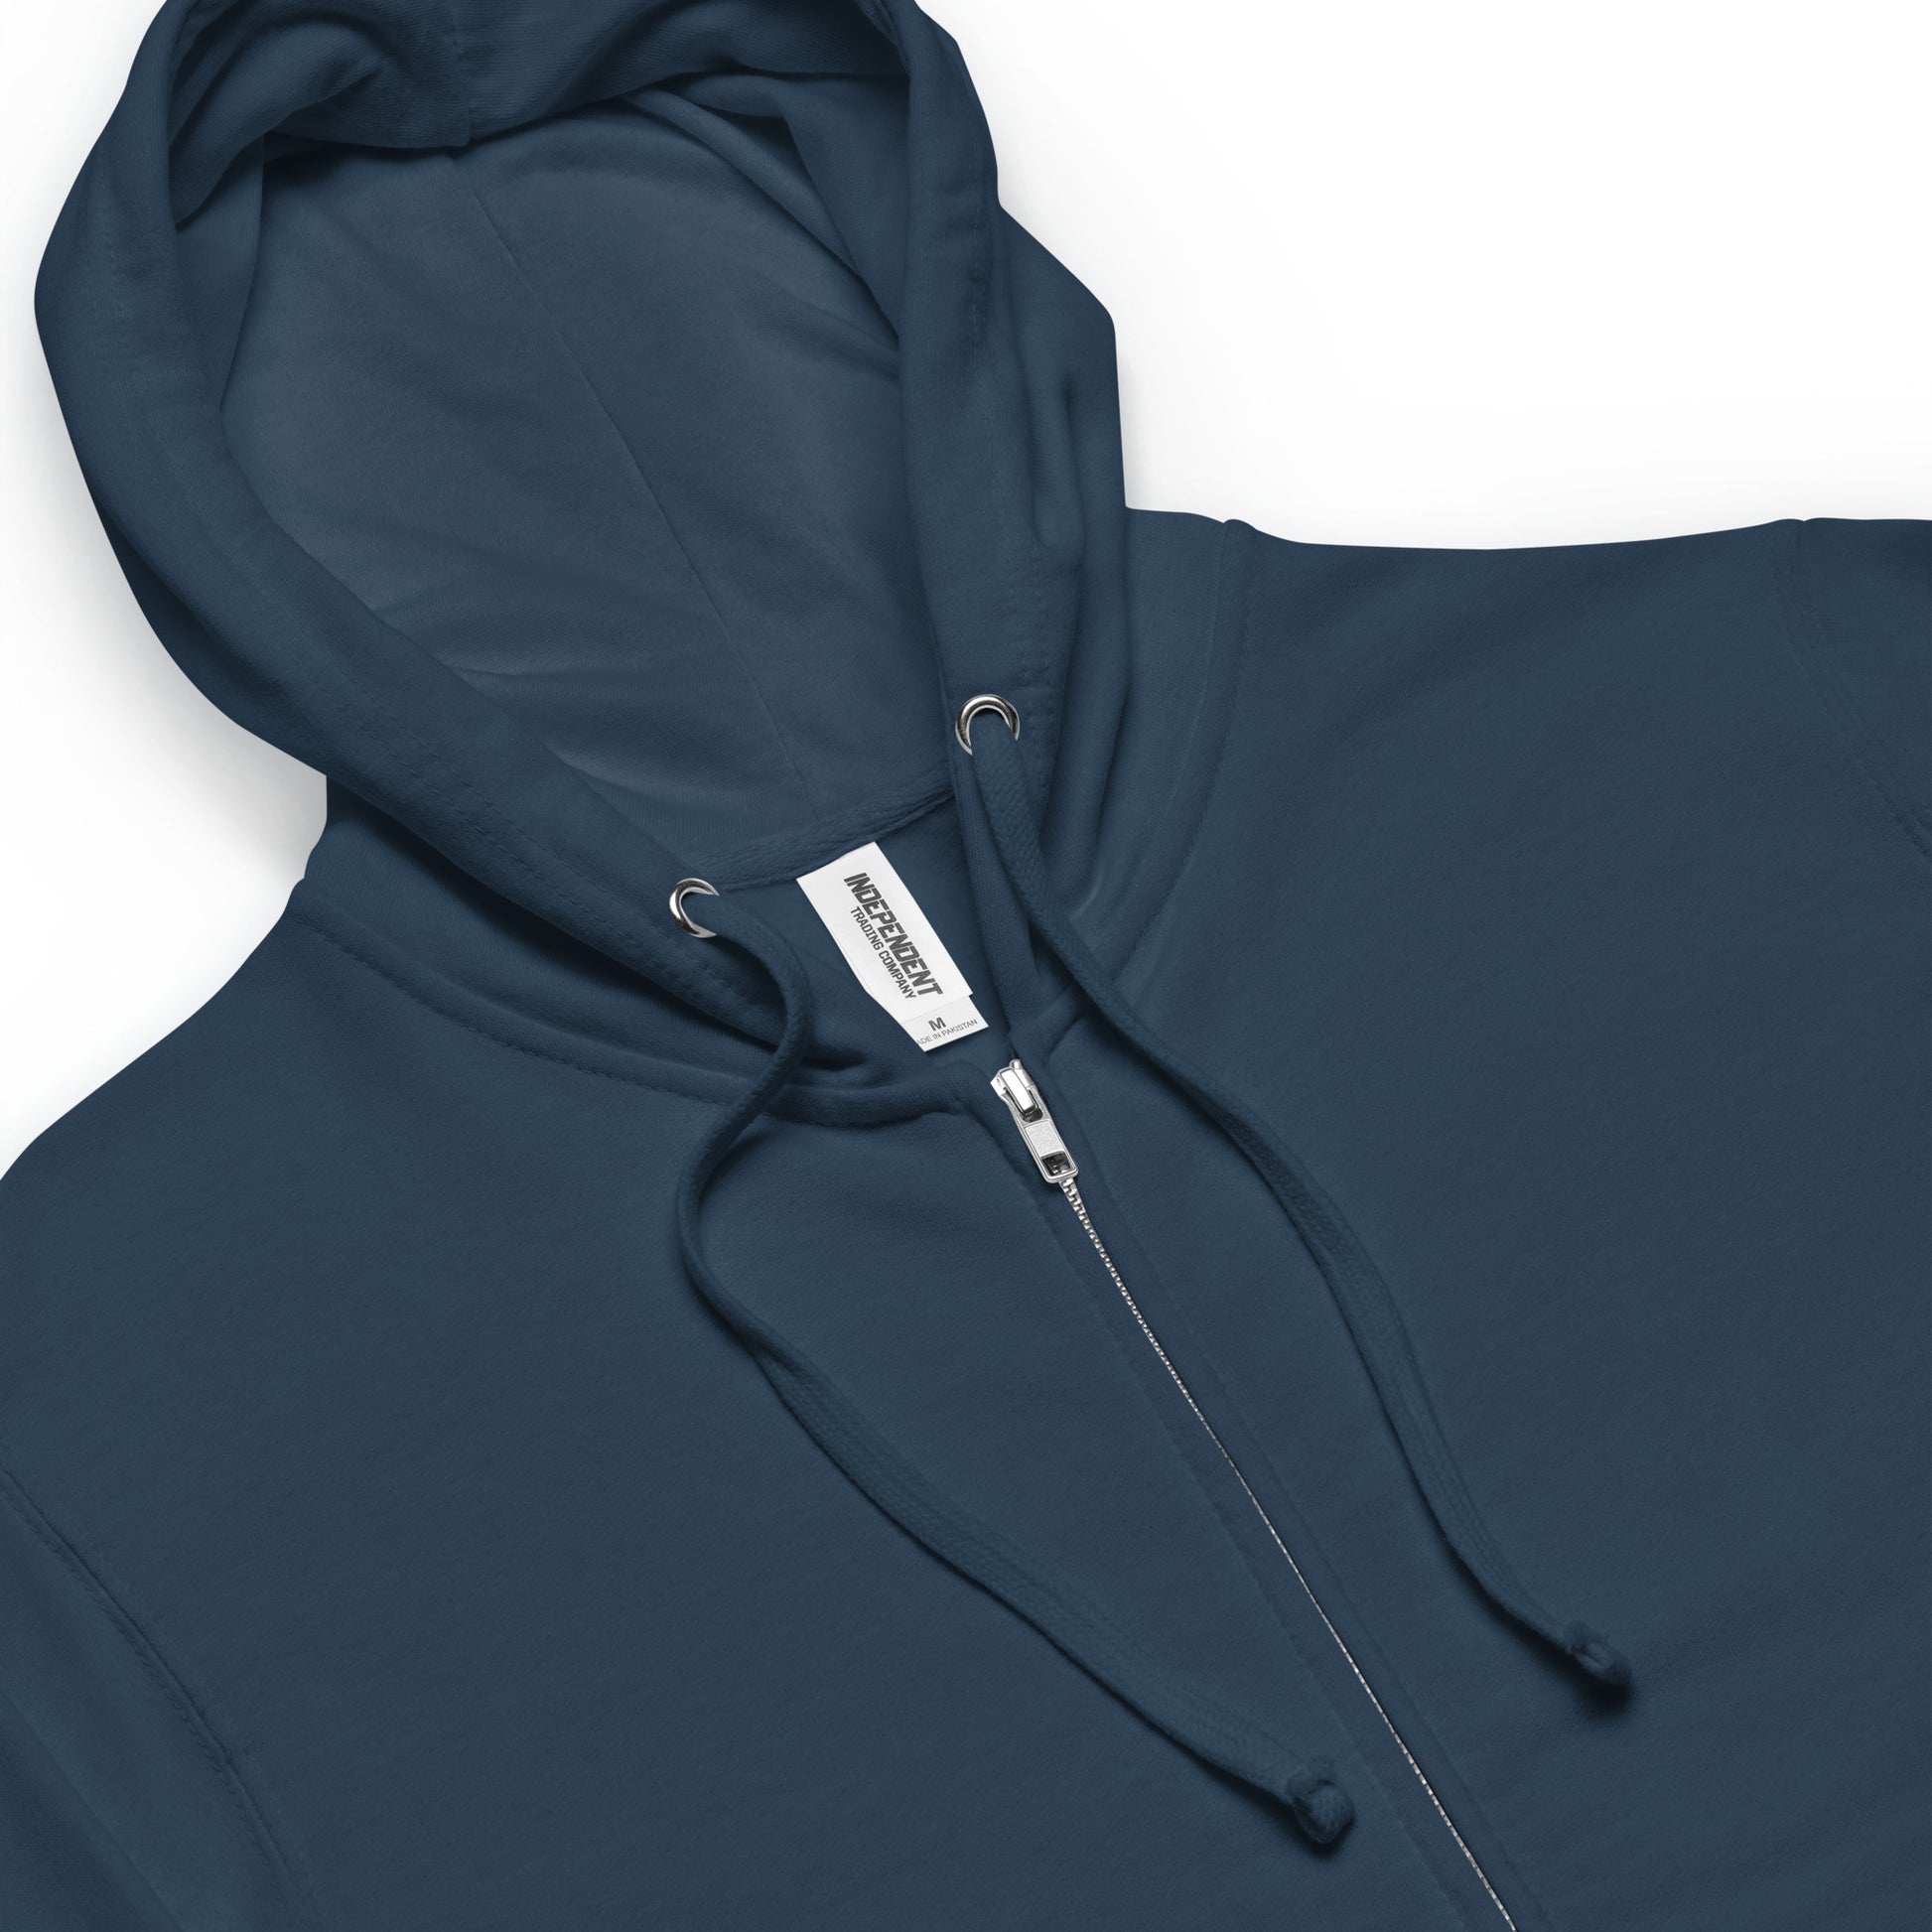 Unisex fleece-lined navy blue colored zip-up hoodie with silently judging text by black crow wearing a monocle in a square with blue paint splatters.  Design on the back of hoodie. Image shows detail of jersey-lined hood, metal eyelets, metal zipper, and matching cords